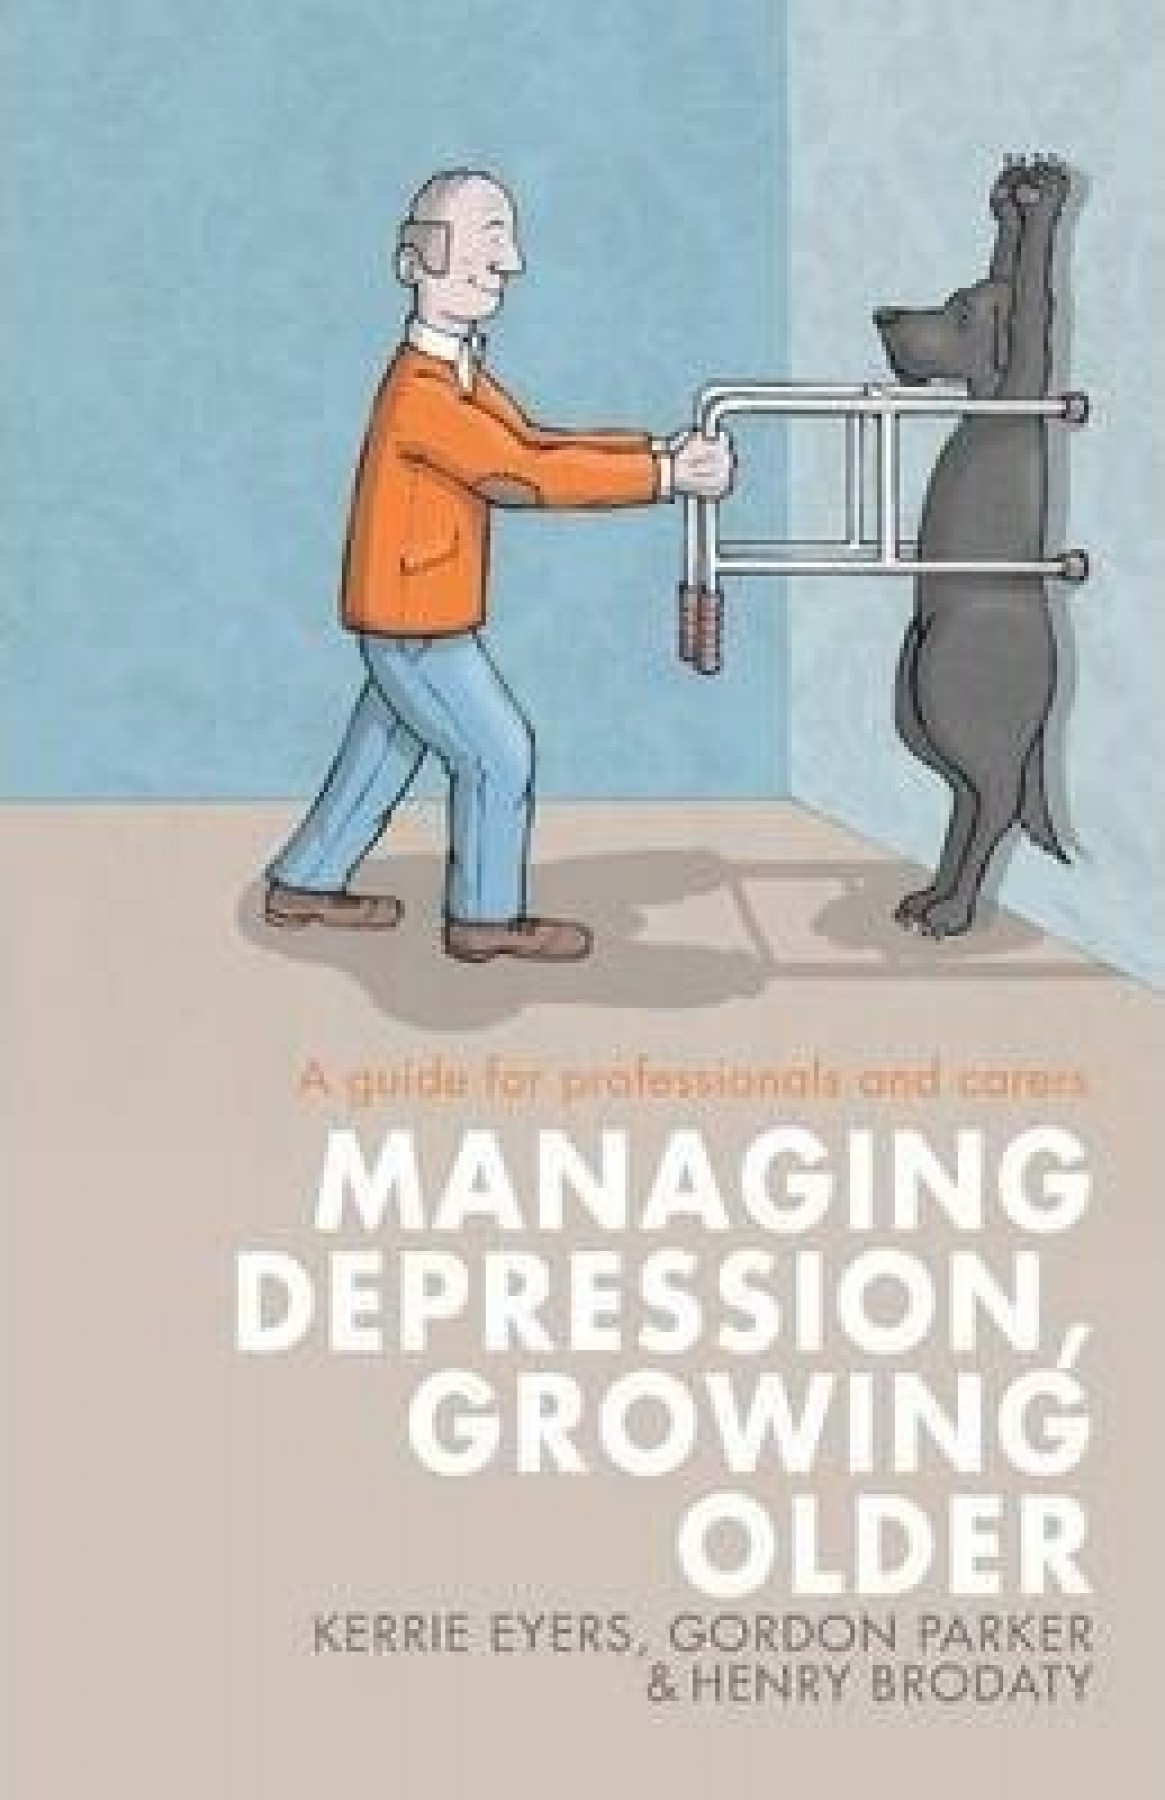 Managing Depression Growing Older: A guide for professionals and carers